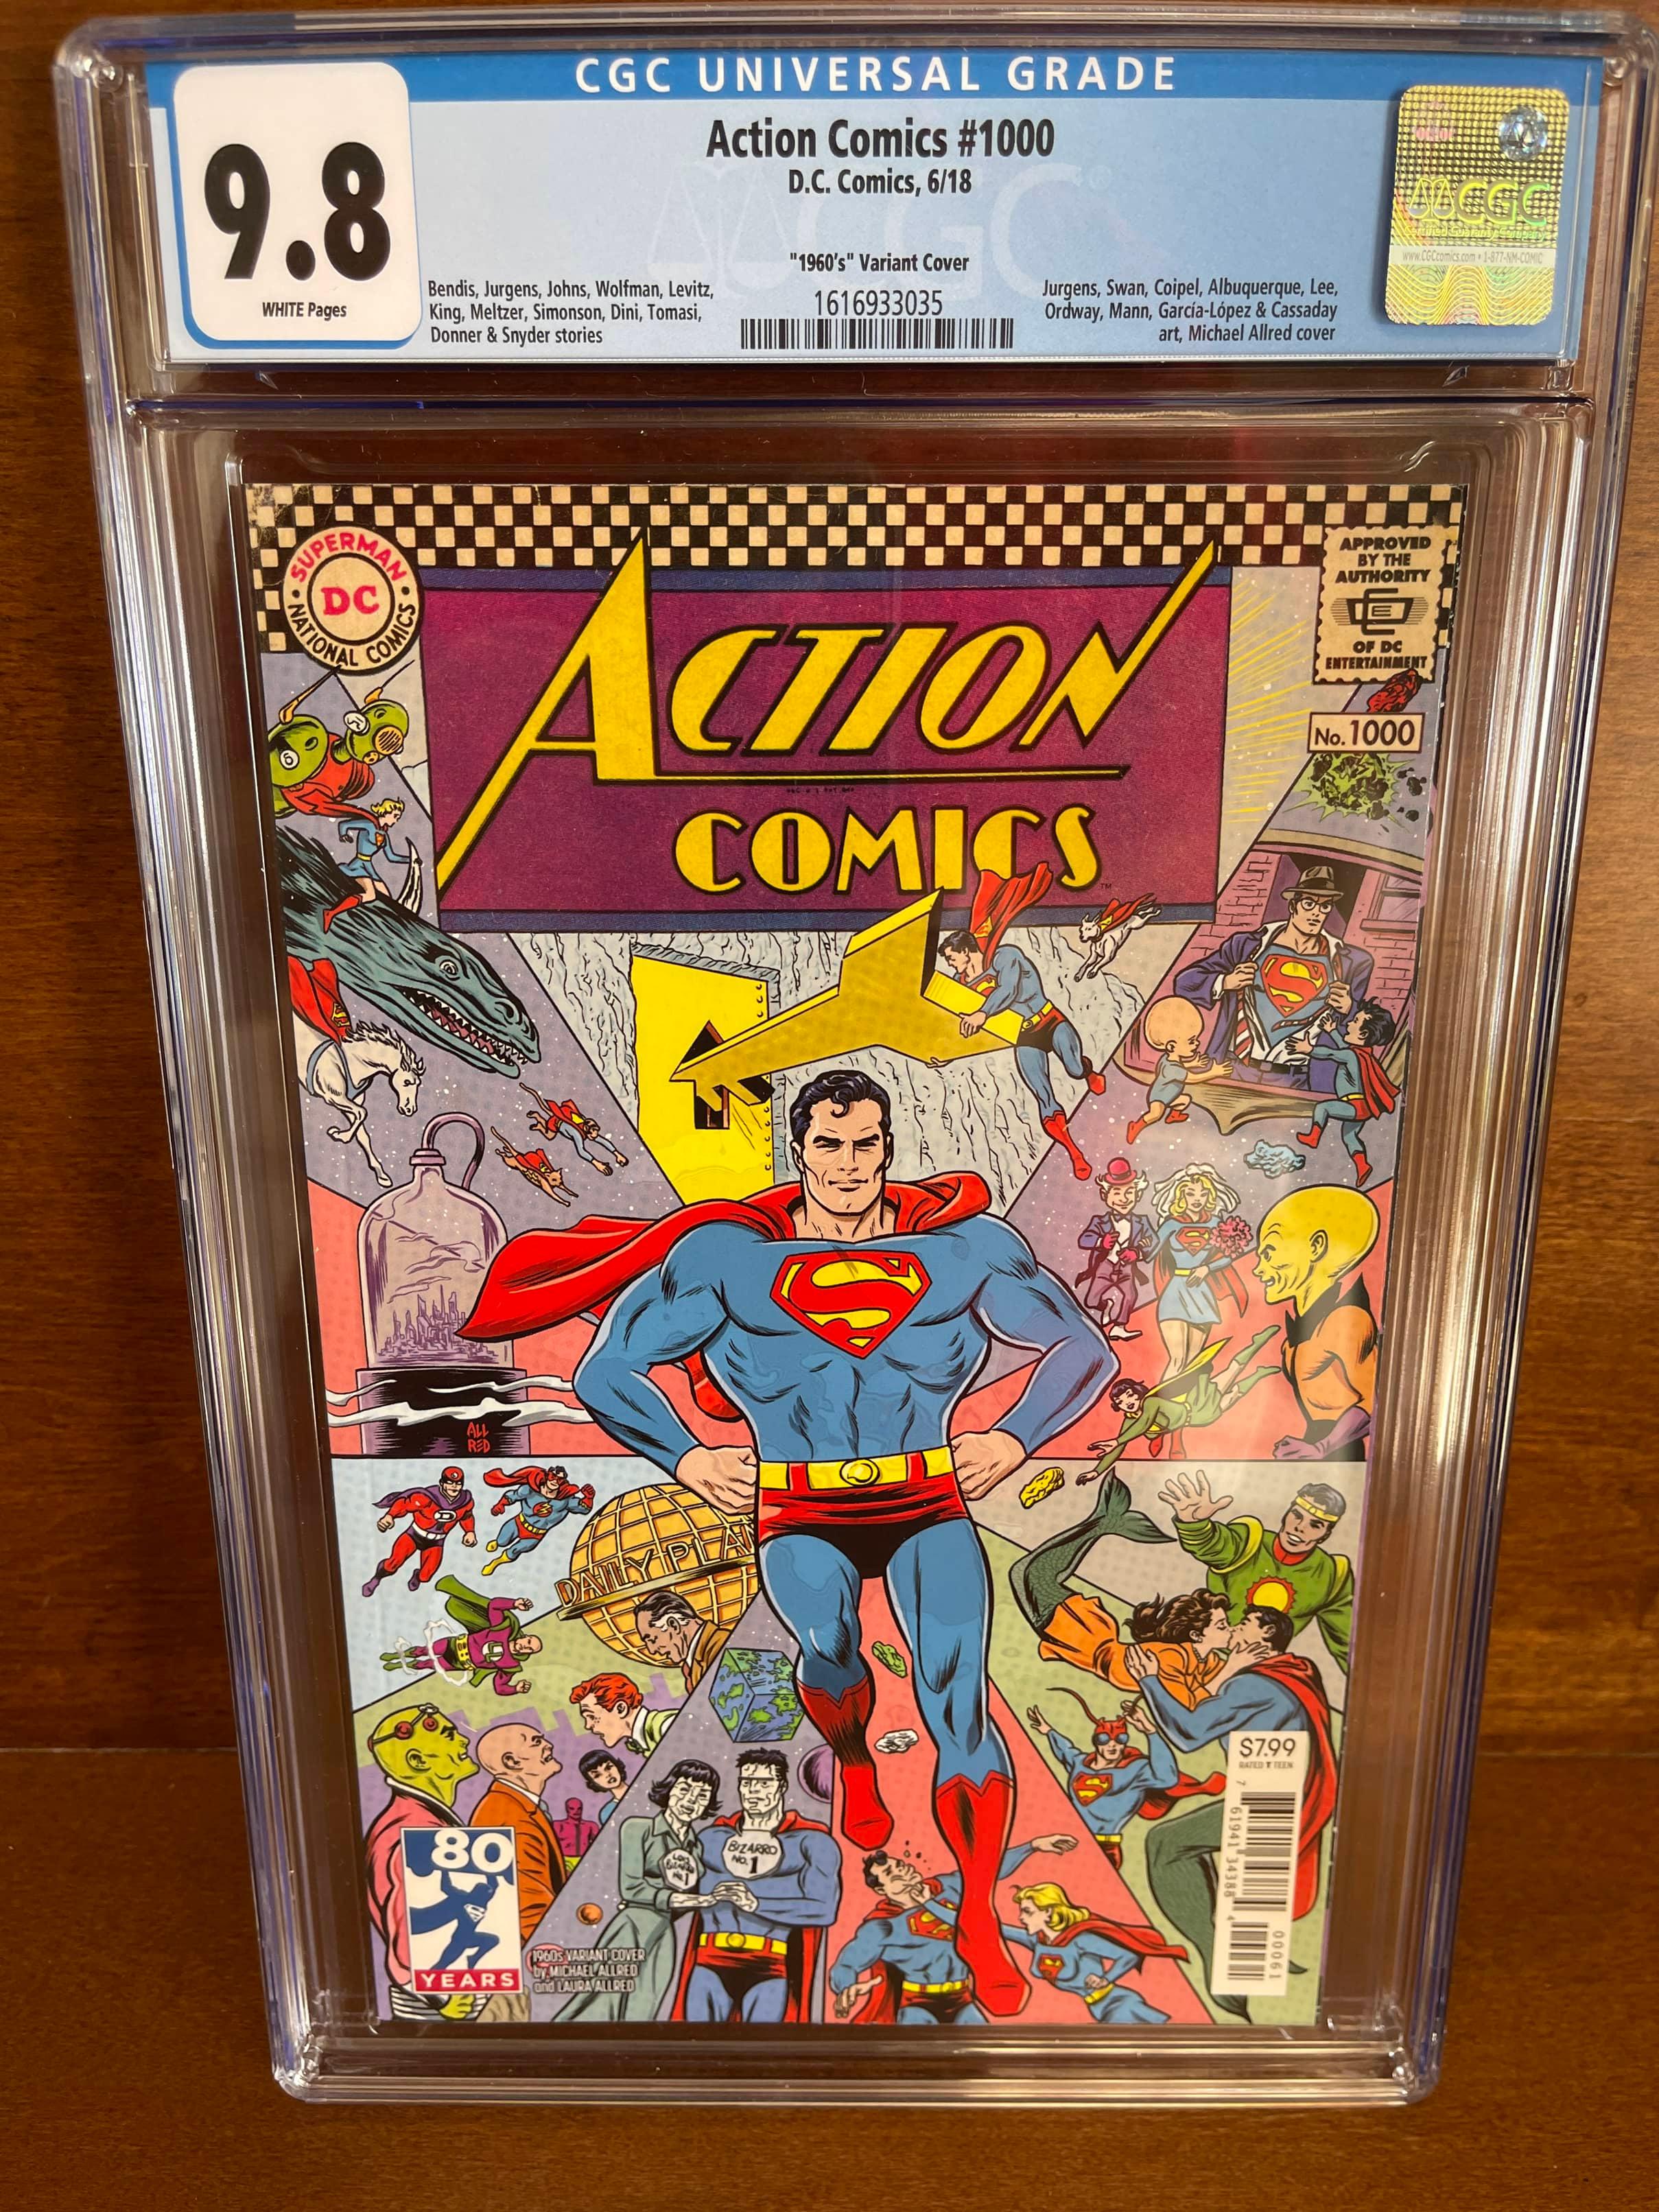 Action Comics #1000 DC Comics Key #1000 issue, 1960s Variant Cover CGC Graded 9.8